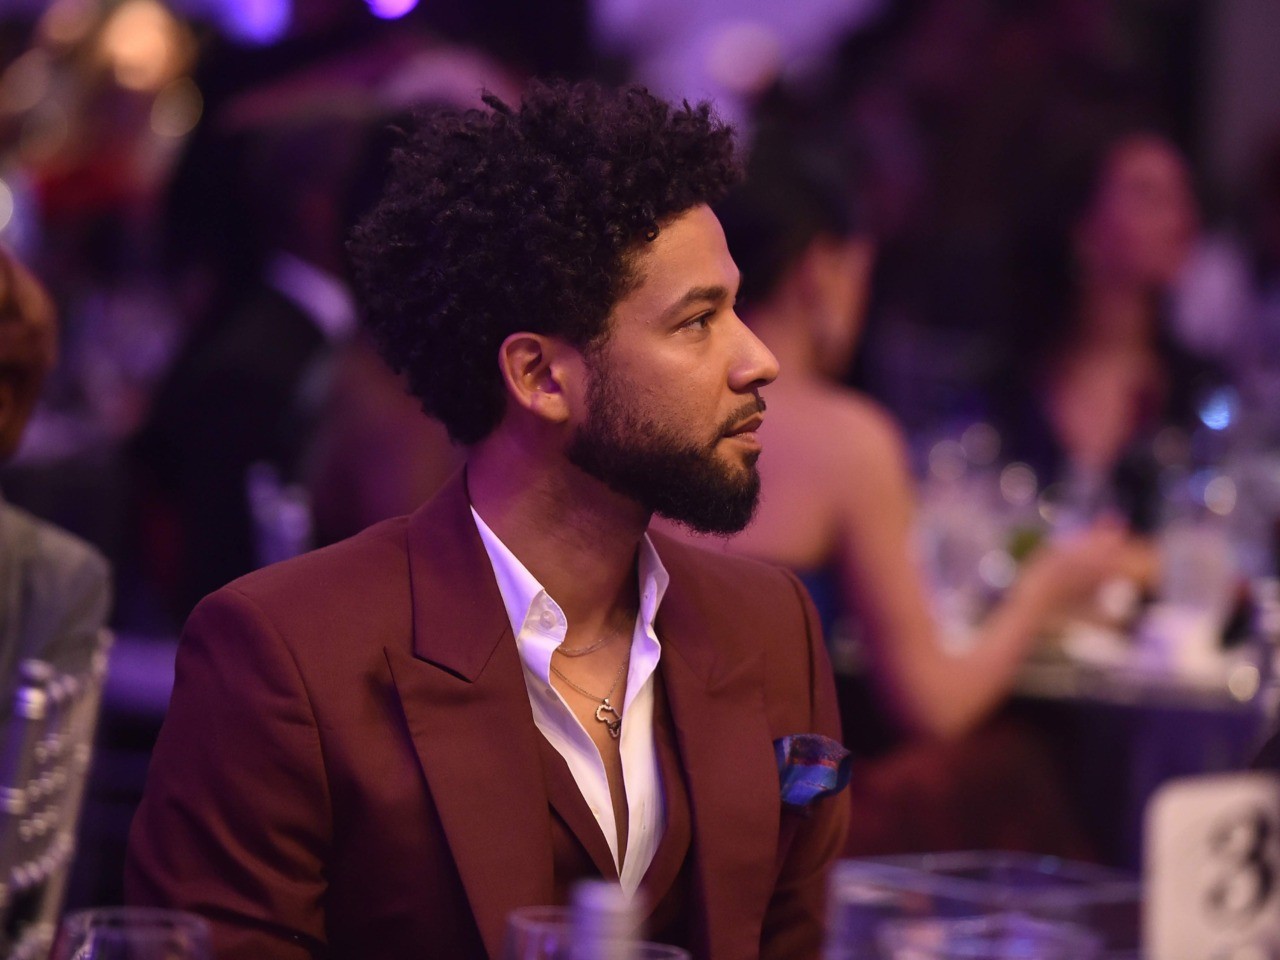 CBS: Brothers Told Police Jussie Smollett Behind Sending Himself Hate Letter